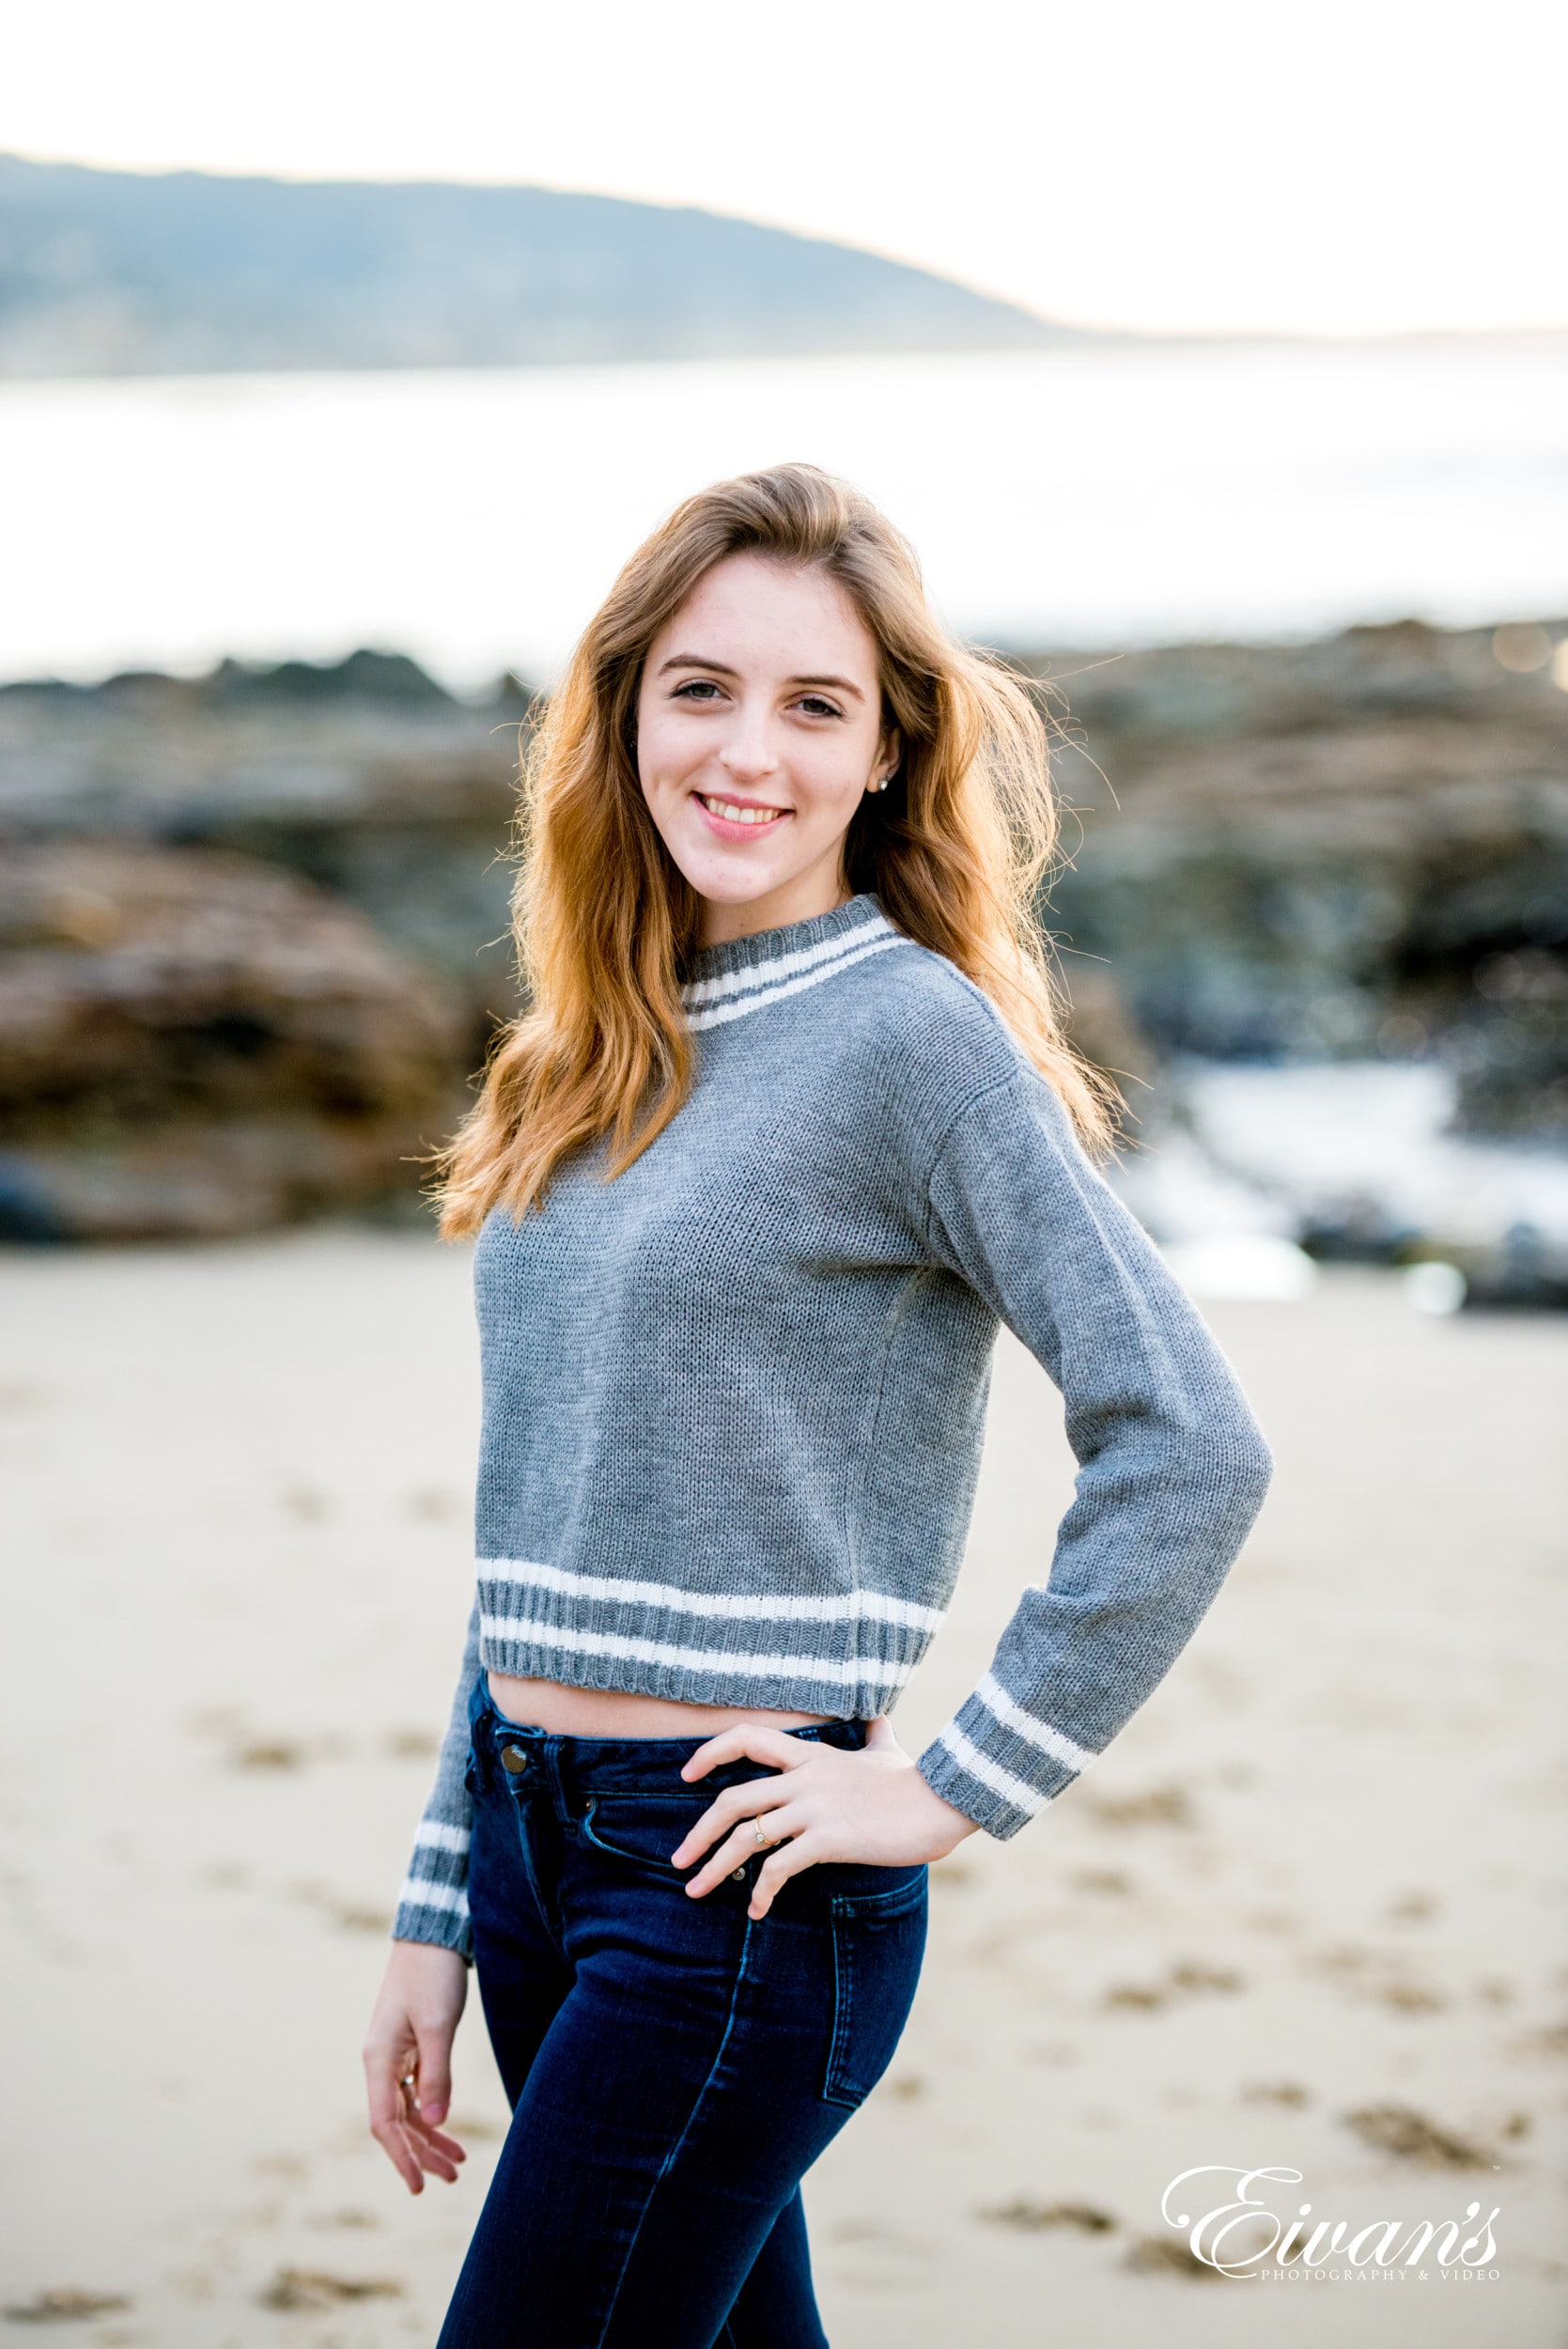 woman in gray long sleeve shirt and blue denim jeans standing on beach during daytime